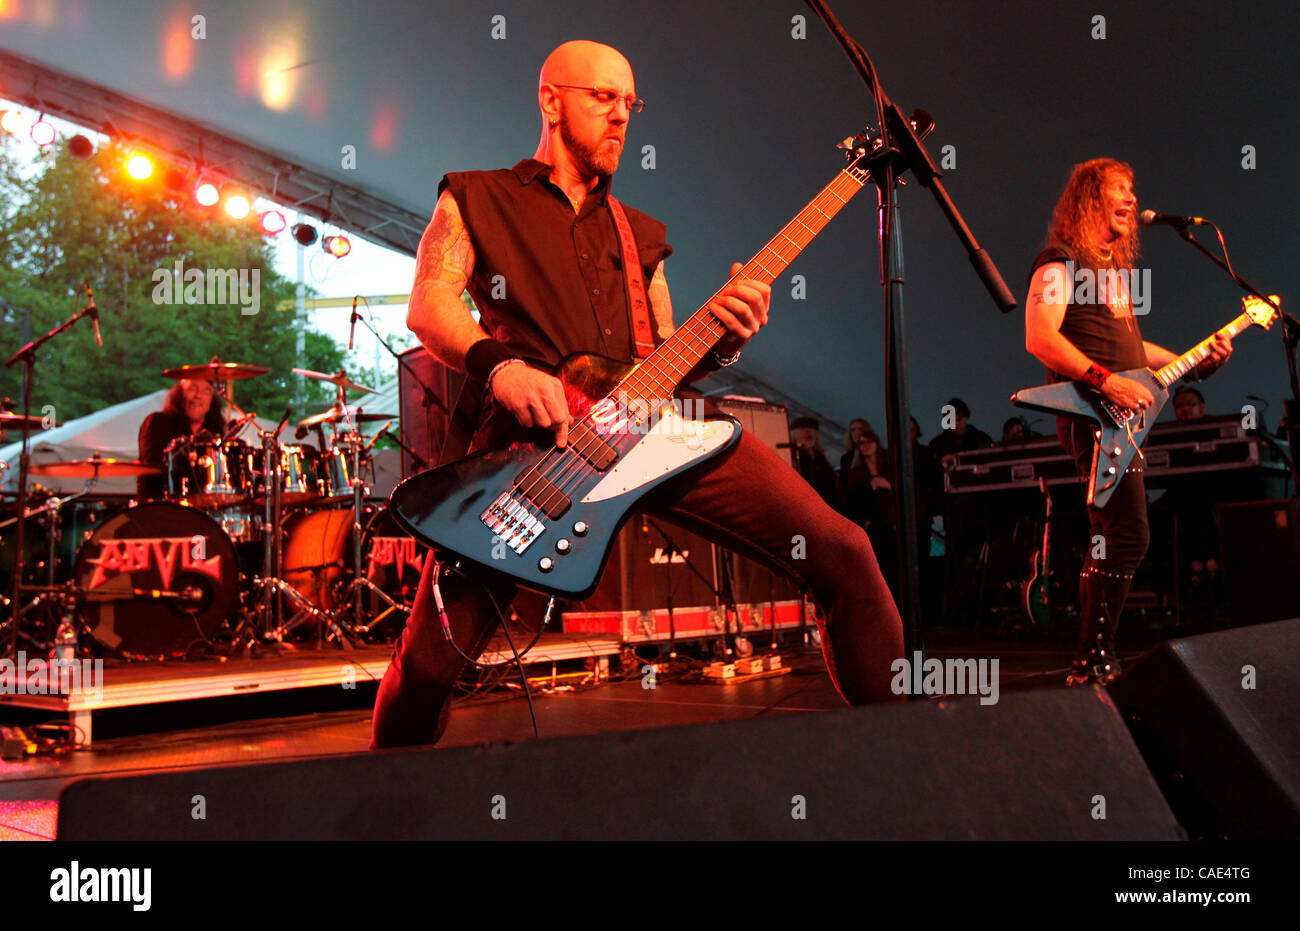 Sept. 06, 2010 - Seattle, Washington, U.S. - ANVIL's (left to right) ROB REINER, GLENN FIVE and STEVE KUDLOW performs on the Center Square Stage during the third and final night of the 40th annual Bumbershoot Music and Arts Festival in Seattle, Washington. Anvil is one of more than 200 international Stock Photo